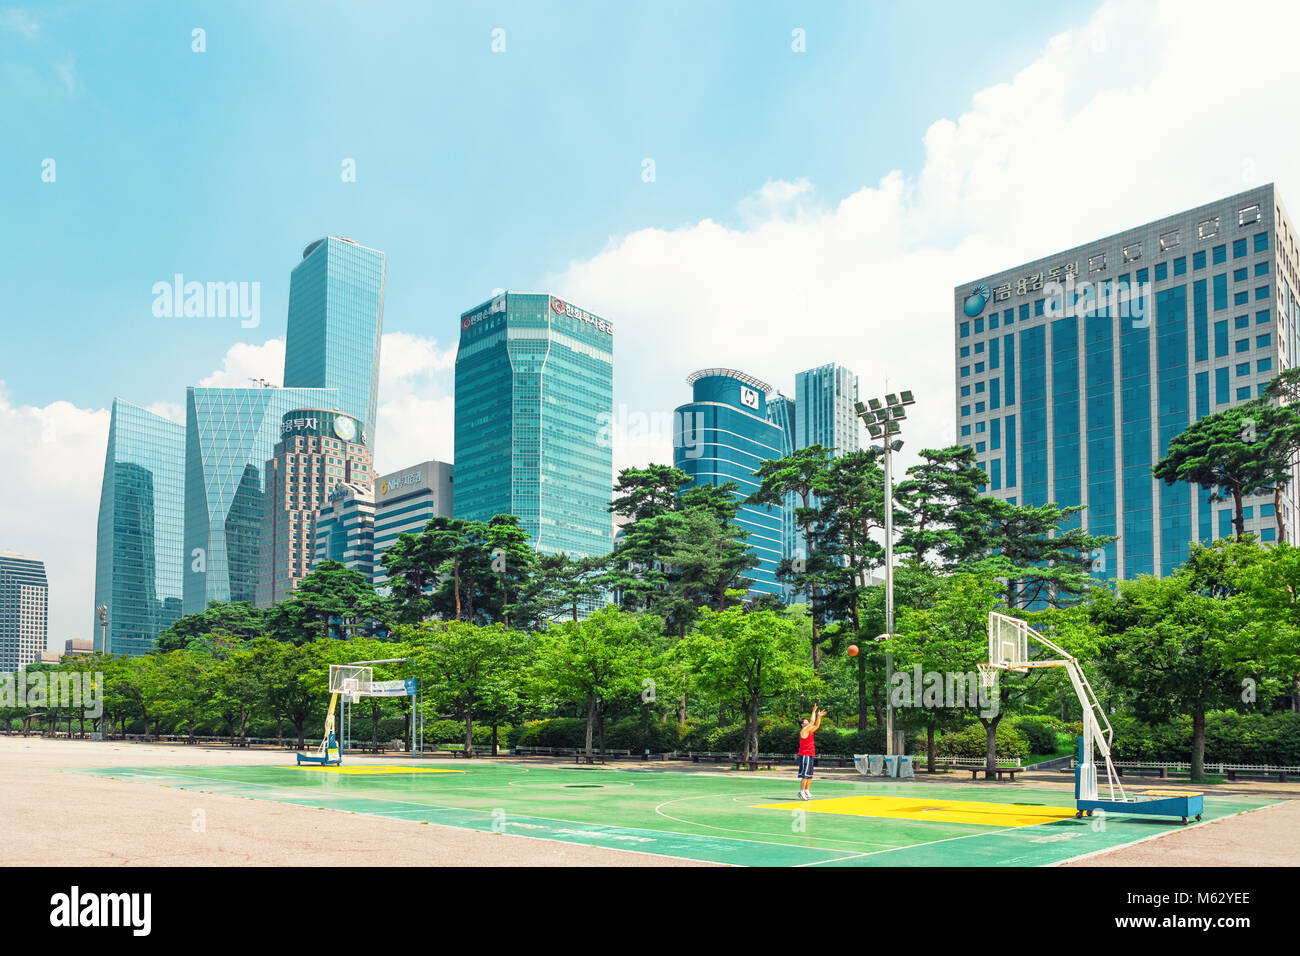 SEOUL, KOREA - AUGUST 14, 2015: Yeouido - Seoul's main finance and investment banking district and office area of Korea’s top businesses in finance, I Stock Photo